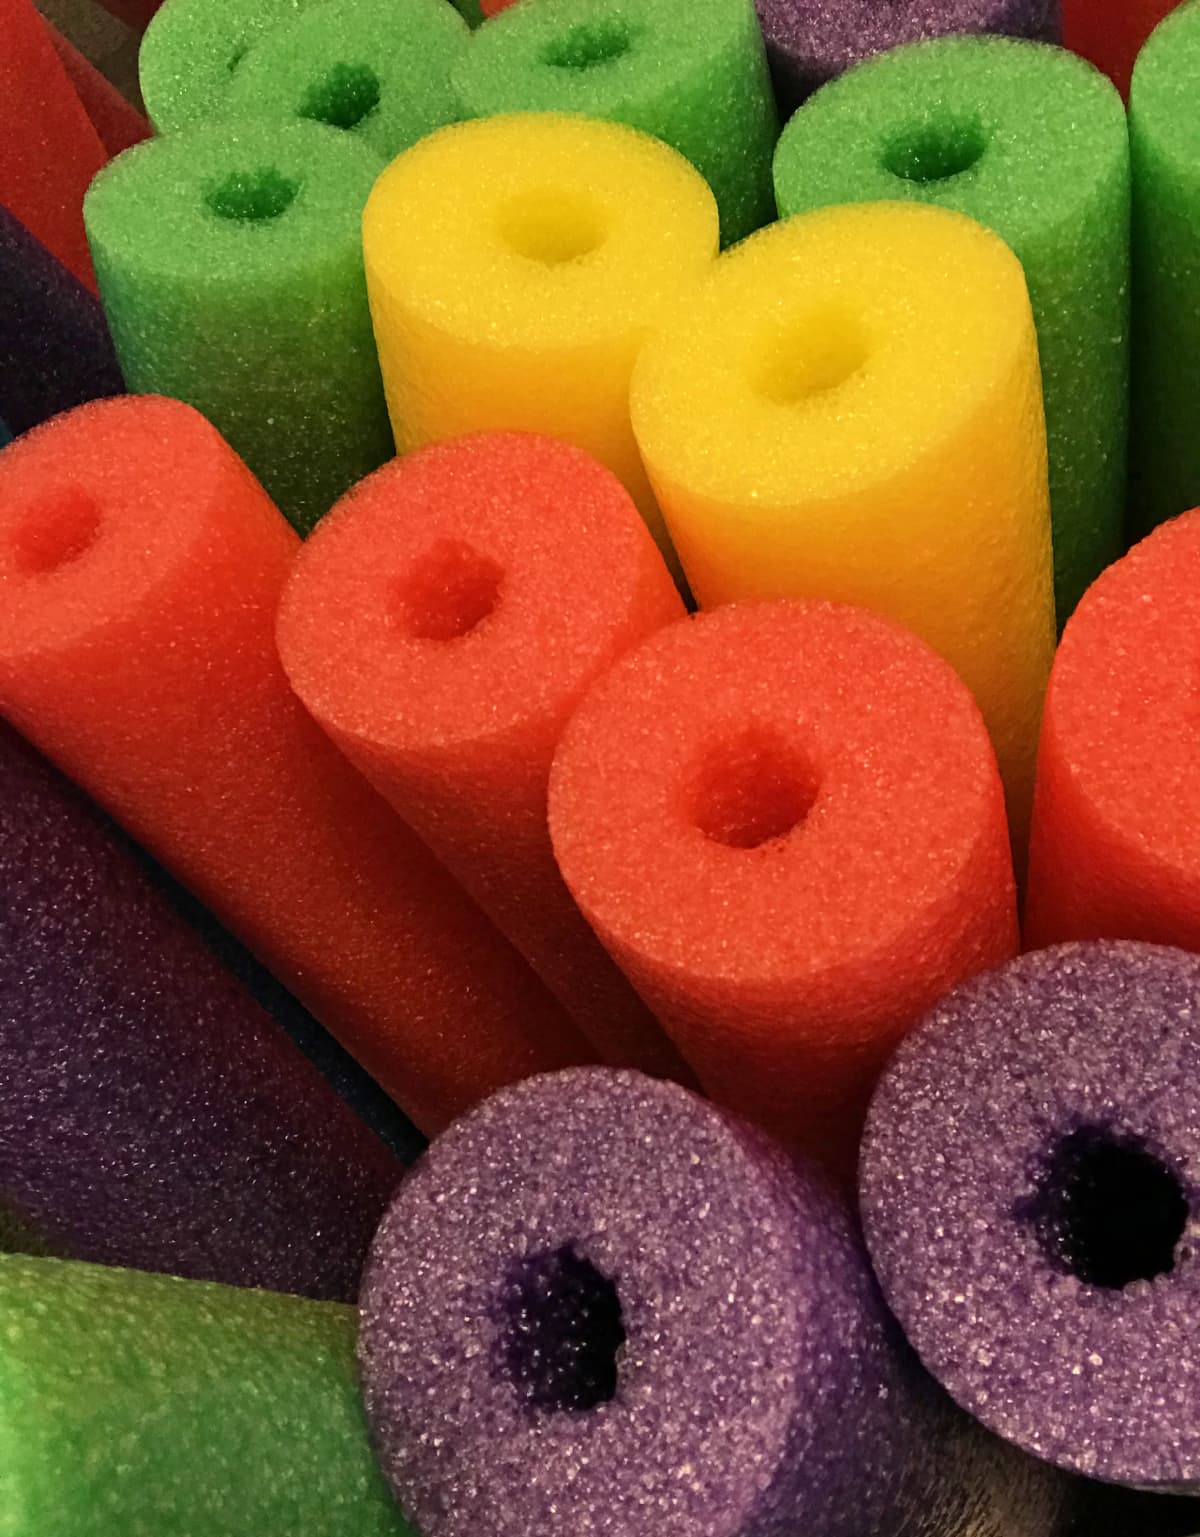 Assorted pool noodles in orange, yellow, green, and purple colors